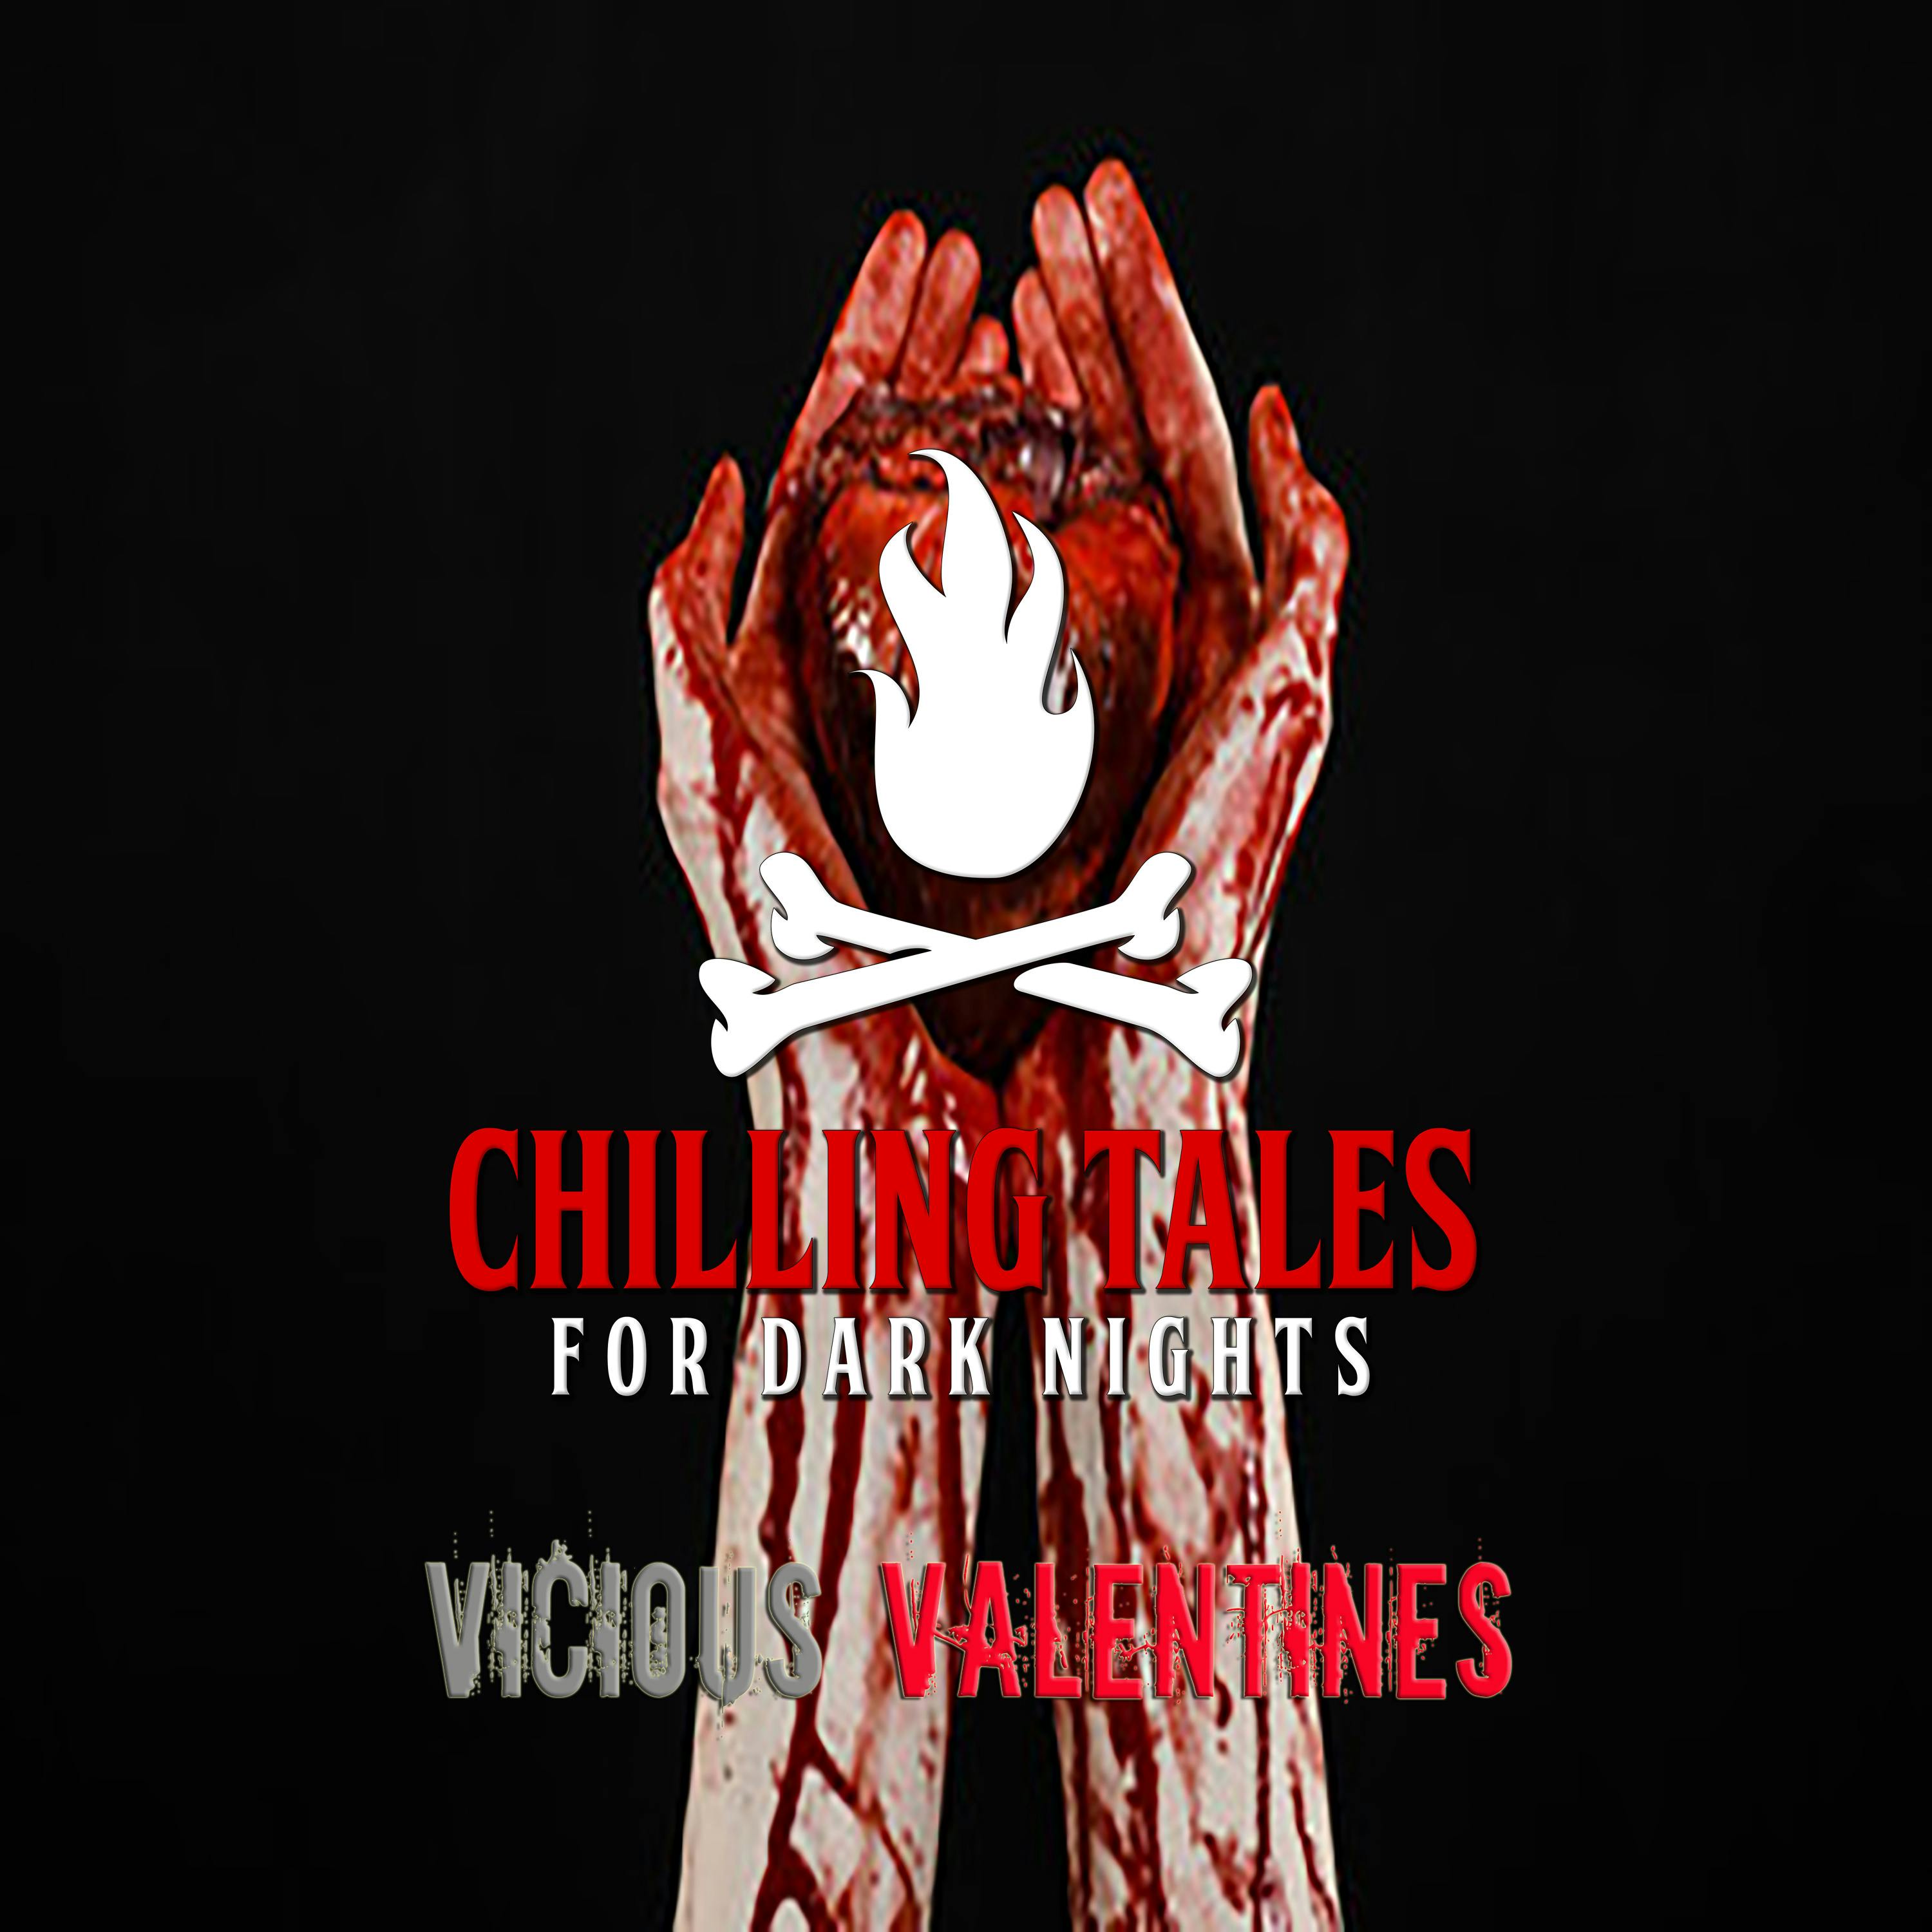 126: Vicious Valentines - Chilling Tales for Dark Nights